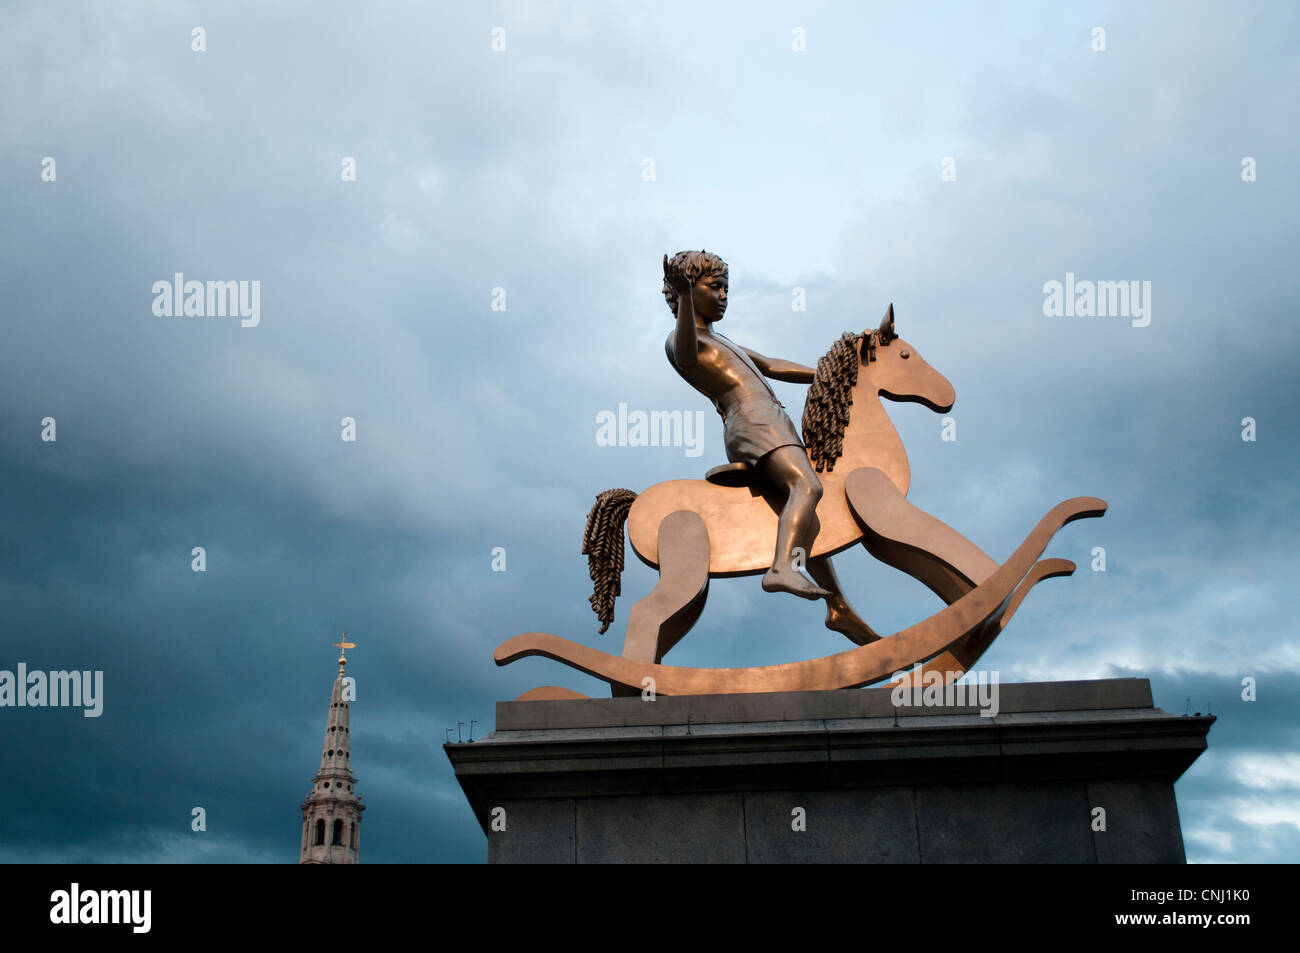 Sculpture of Child on rocking horse on the fourth plinth in Trafalgar Square, London, UK Stock Photo